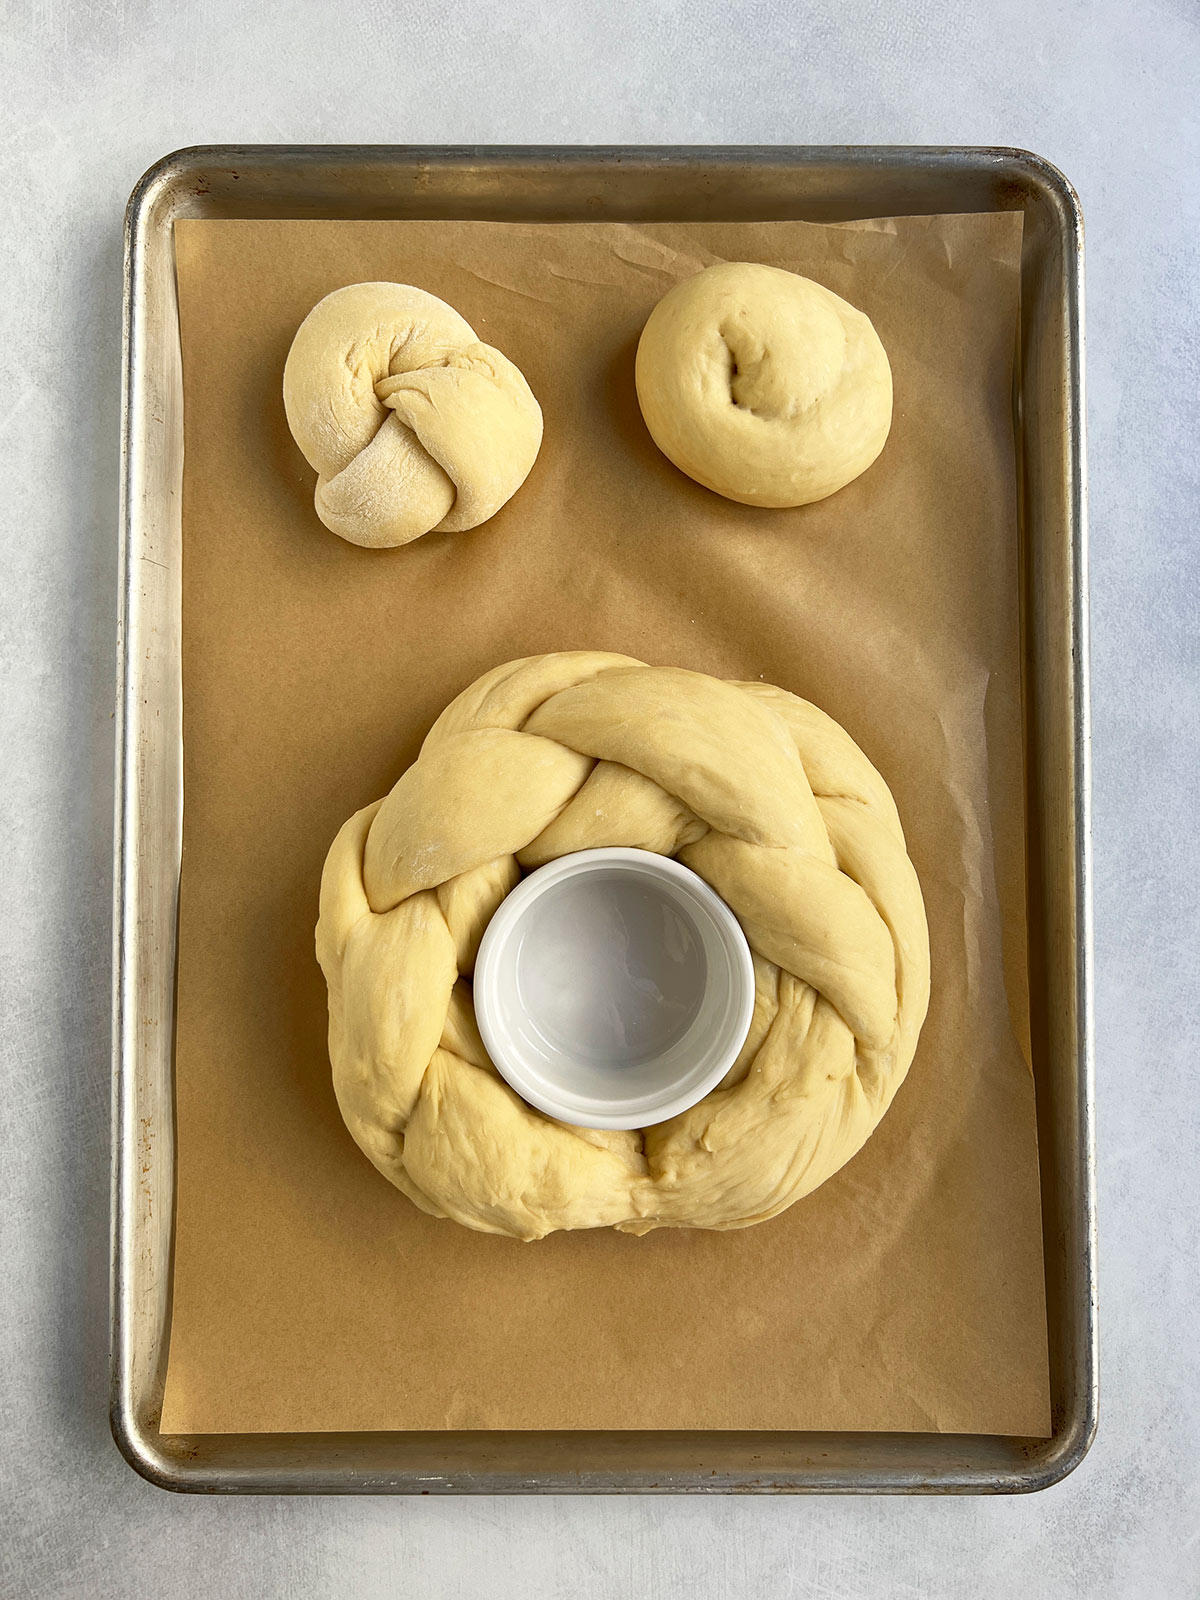 Lonni's challah dough braided and wrapped around a ramekin into a round shape with 2 rolls next to it.